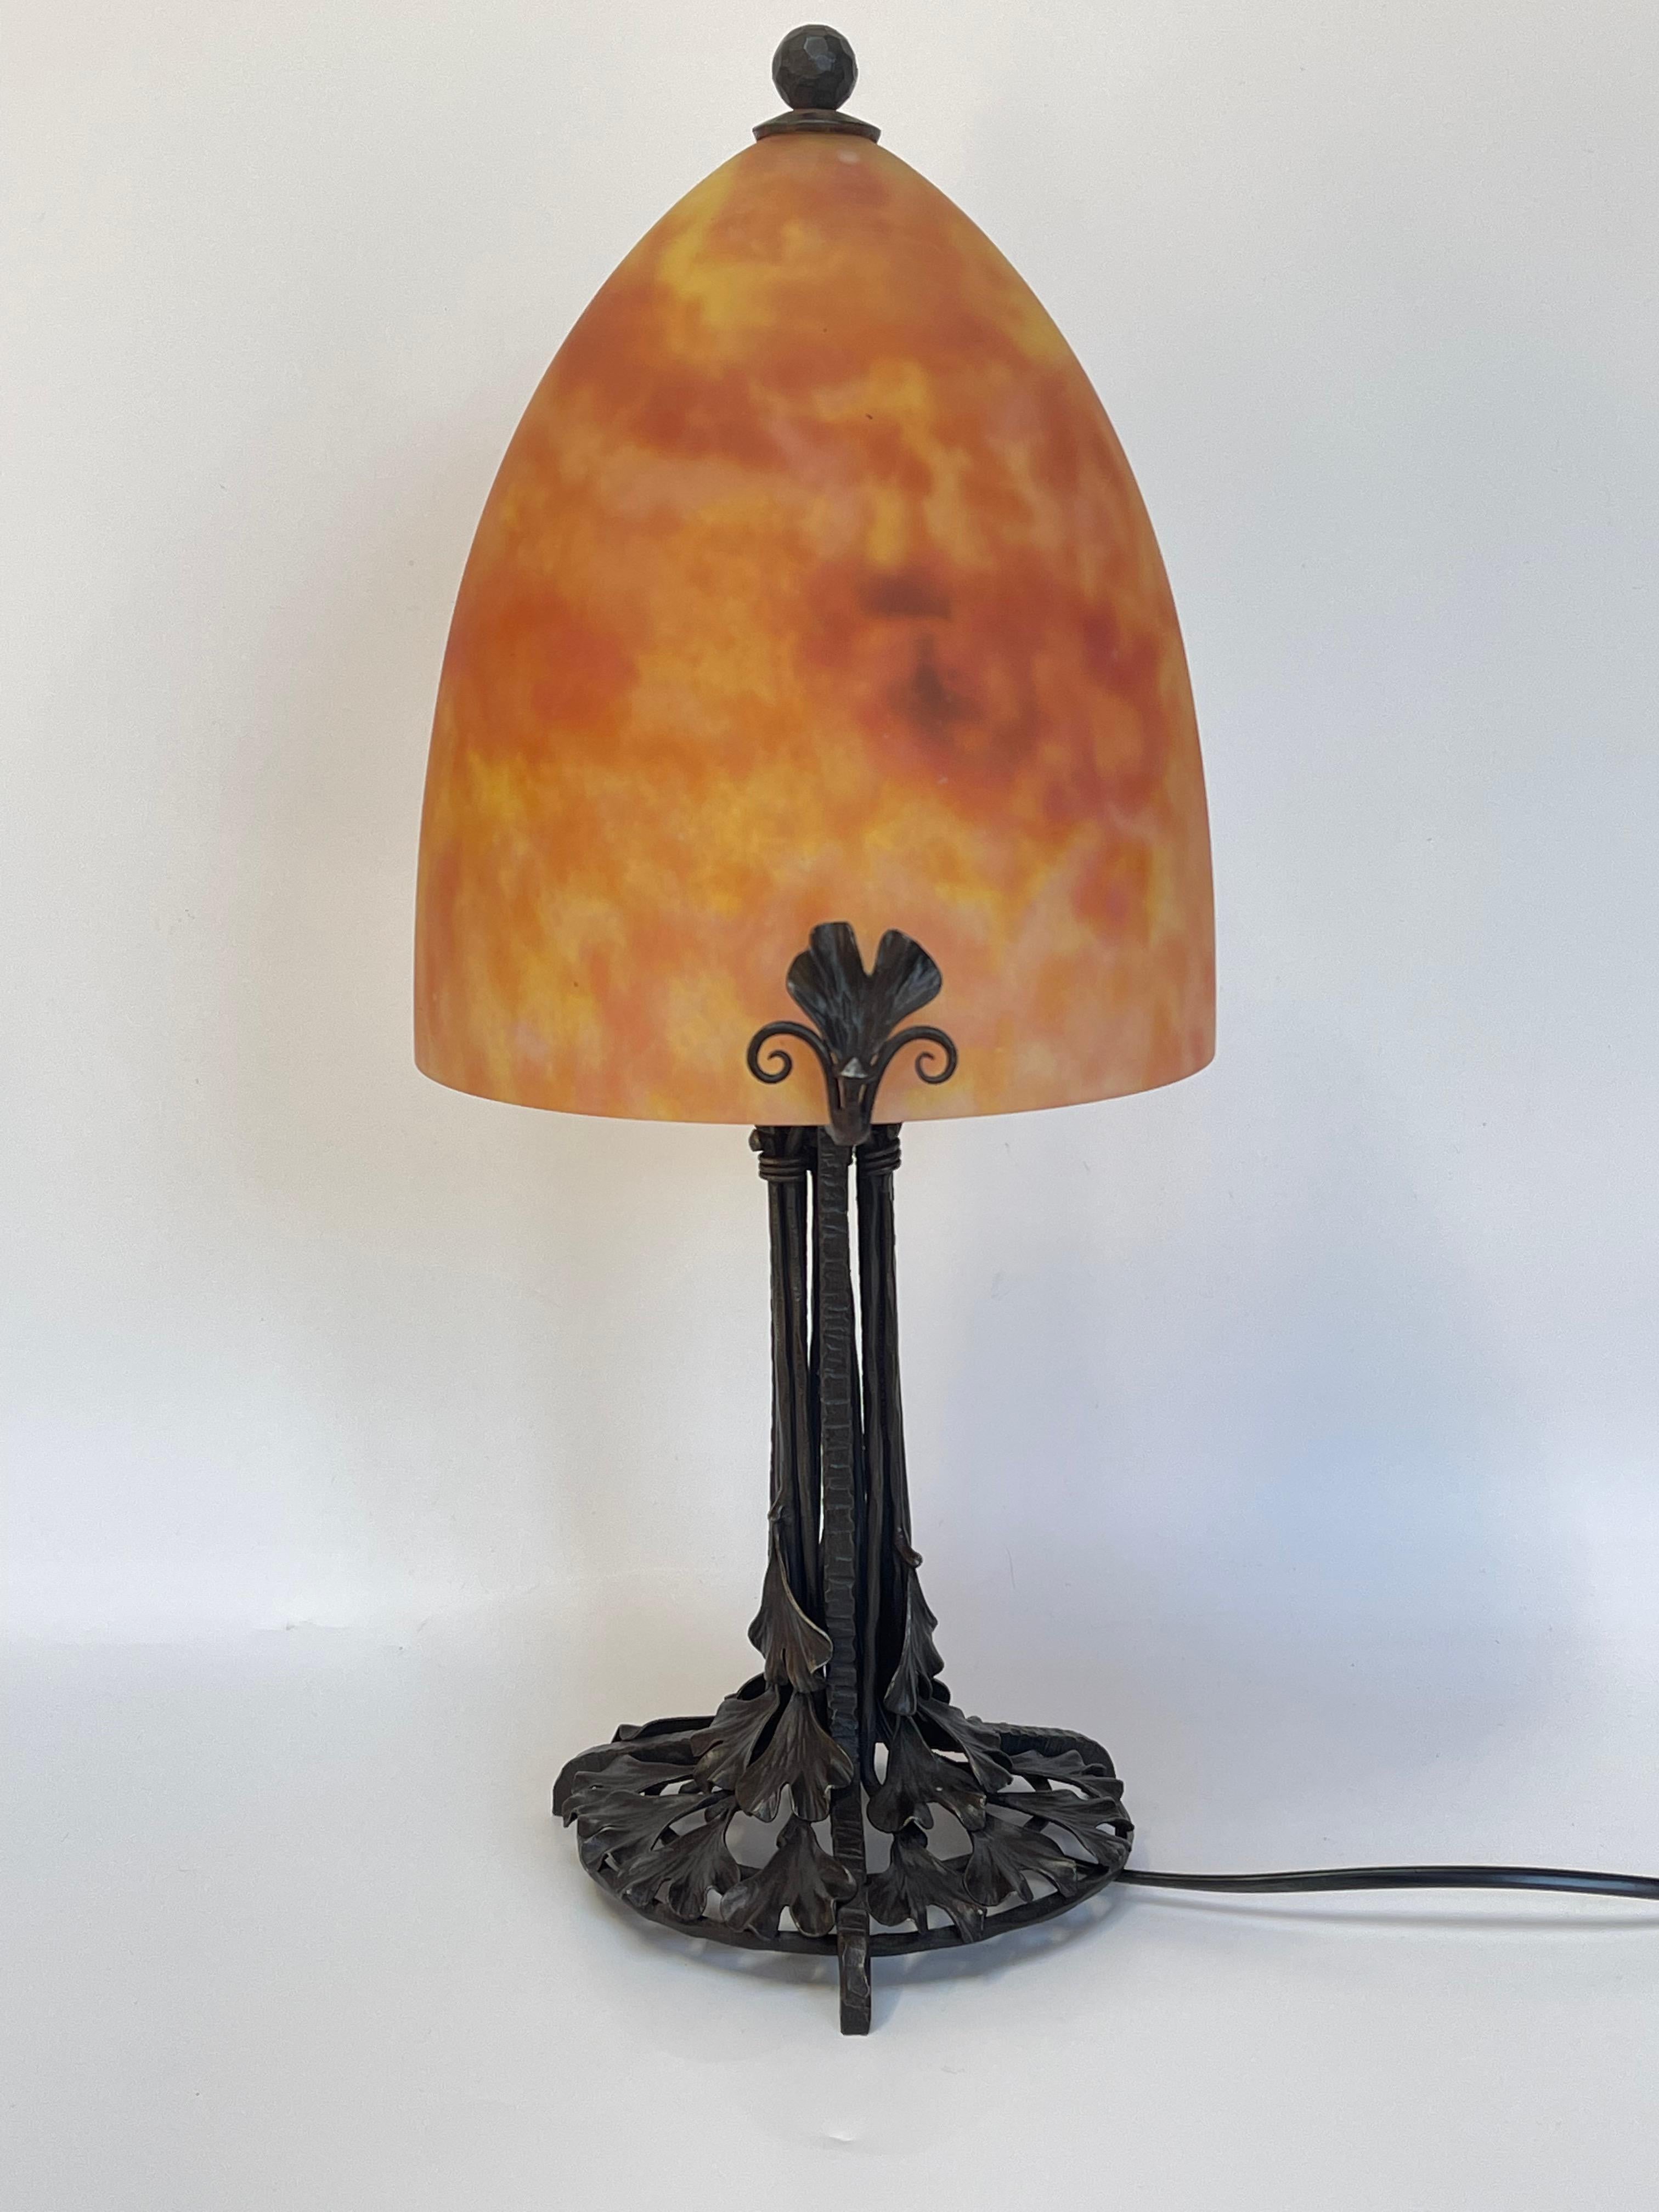 Edgar Brandt wrought iron lamp decorated with ginko biloba. 
Signed E Brandt on the support of the shell
Glass paste shell signed Daum Nancy.
In very good condition and electrified.

Total height: 46.5 cm
Foot diameter: 17 cm
Shell diameter: 20